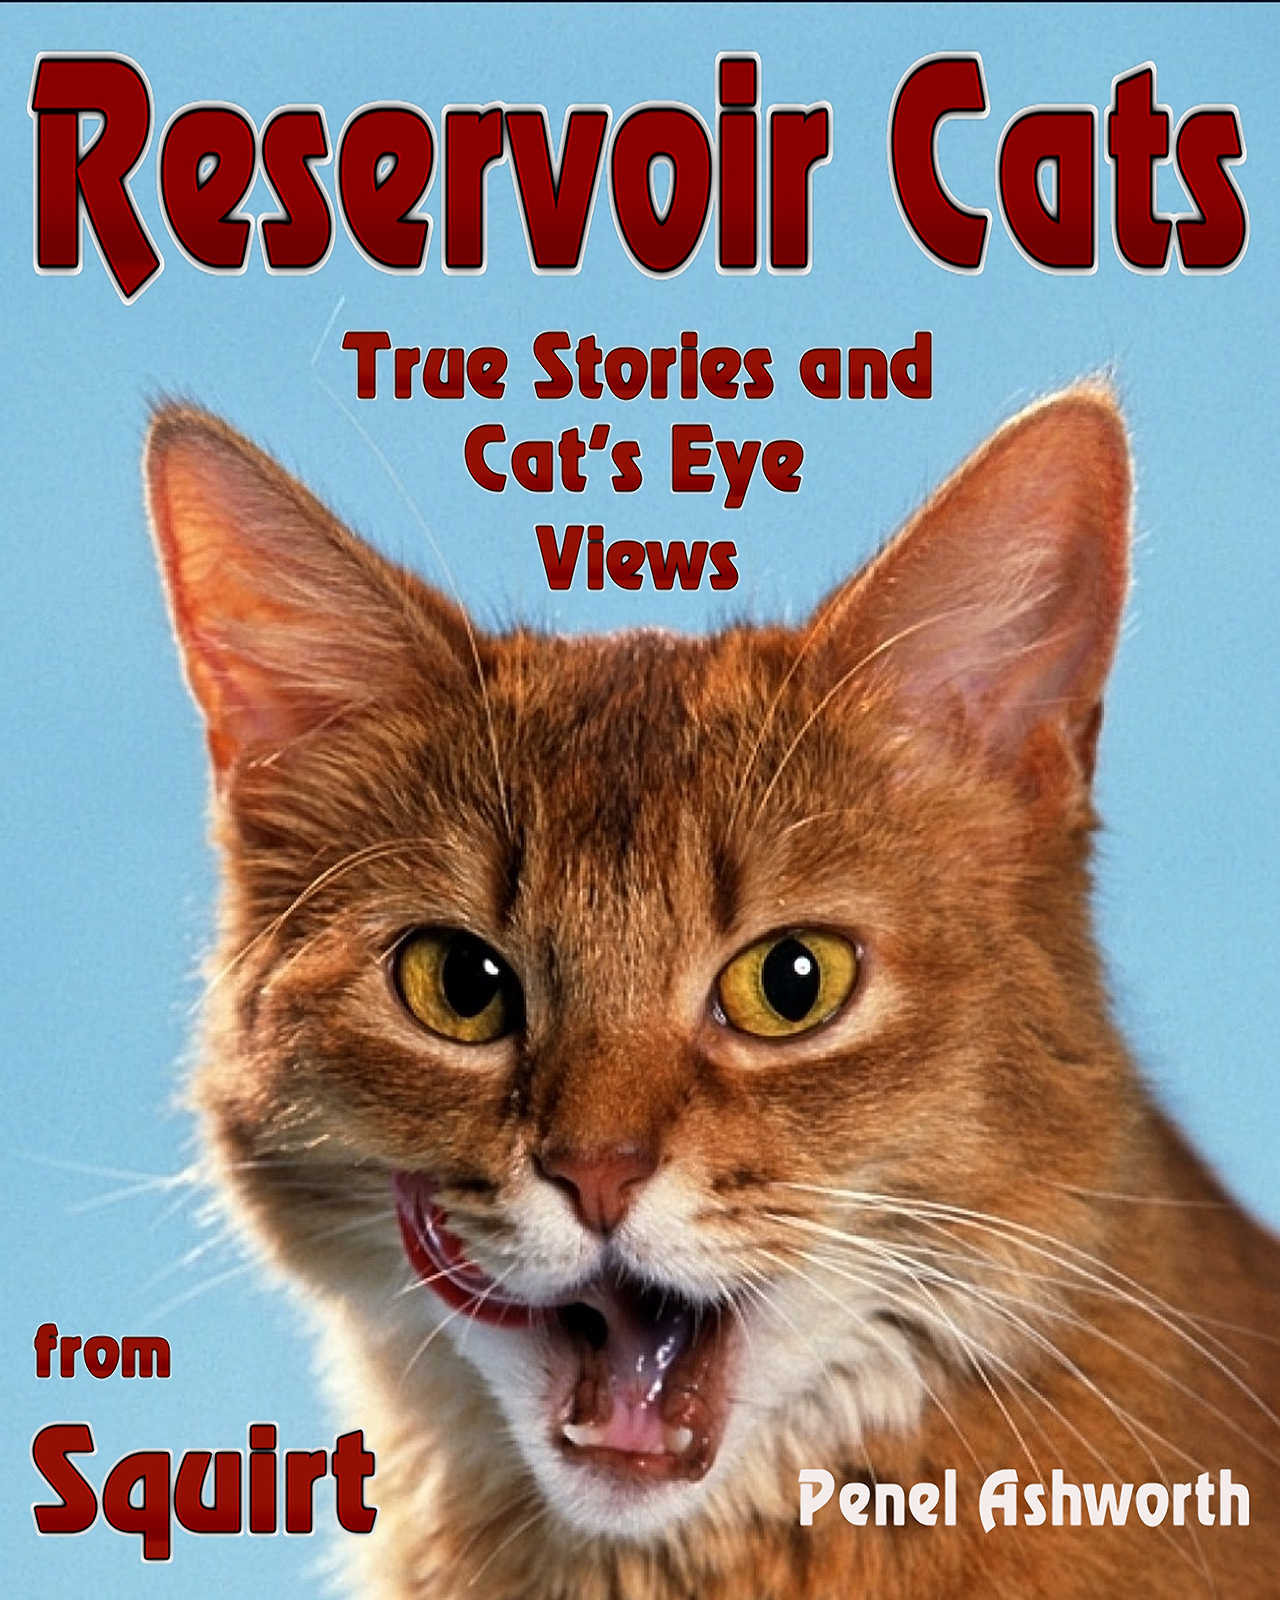 Reservoir Cats: True Stories and Cat’s Eye Views from Squirt by Penel Ashworth